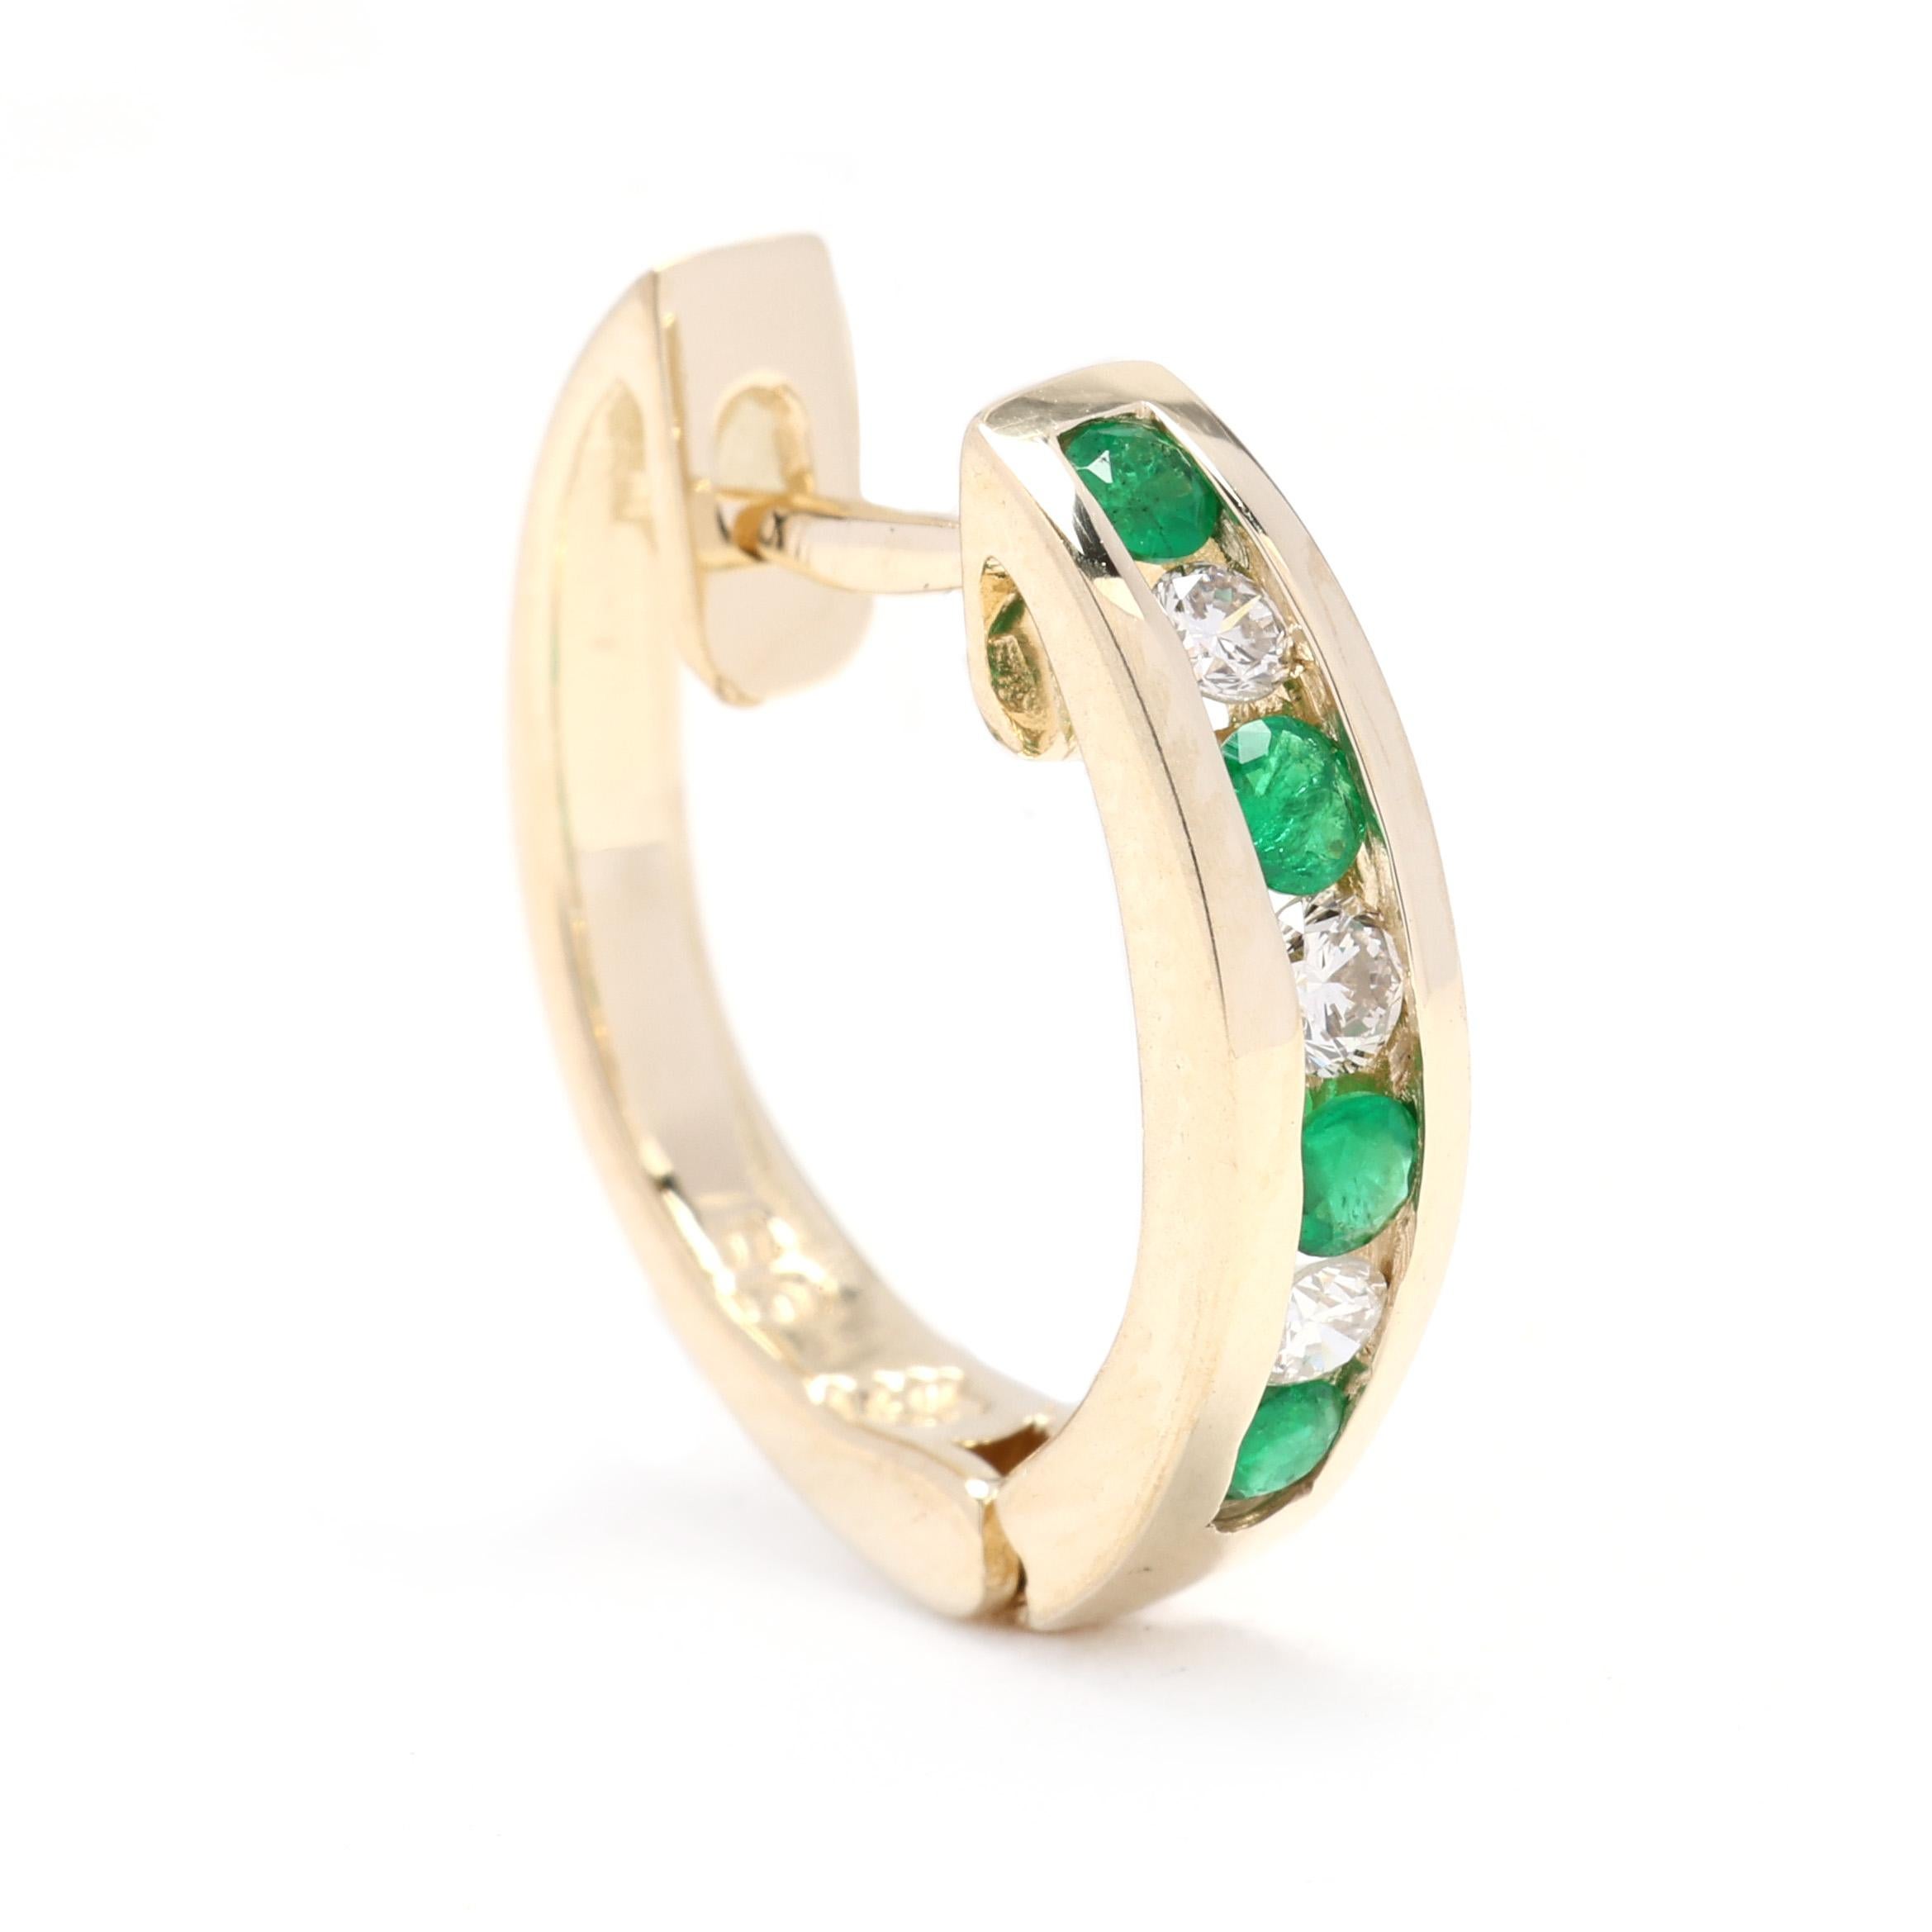 These stunning 14k yellow gold huggie hoops are adorned with a total carat weight of 0.53 diamonds and vibrant emeralds. The diamonds and emeralds are prong-set along the front of the hoops, creating a beautiful contrast between the sparkling